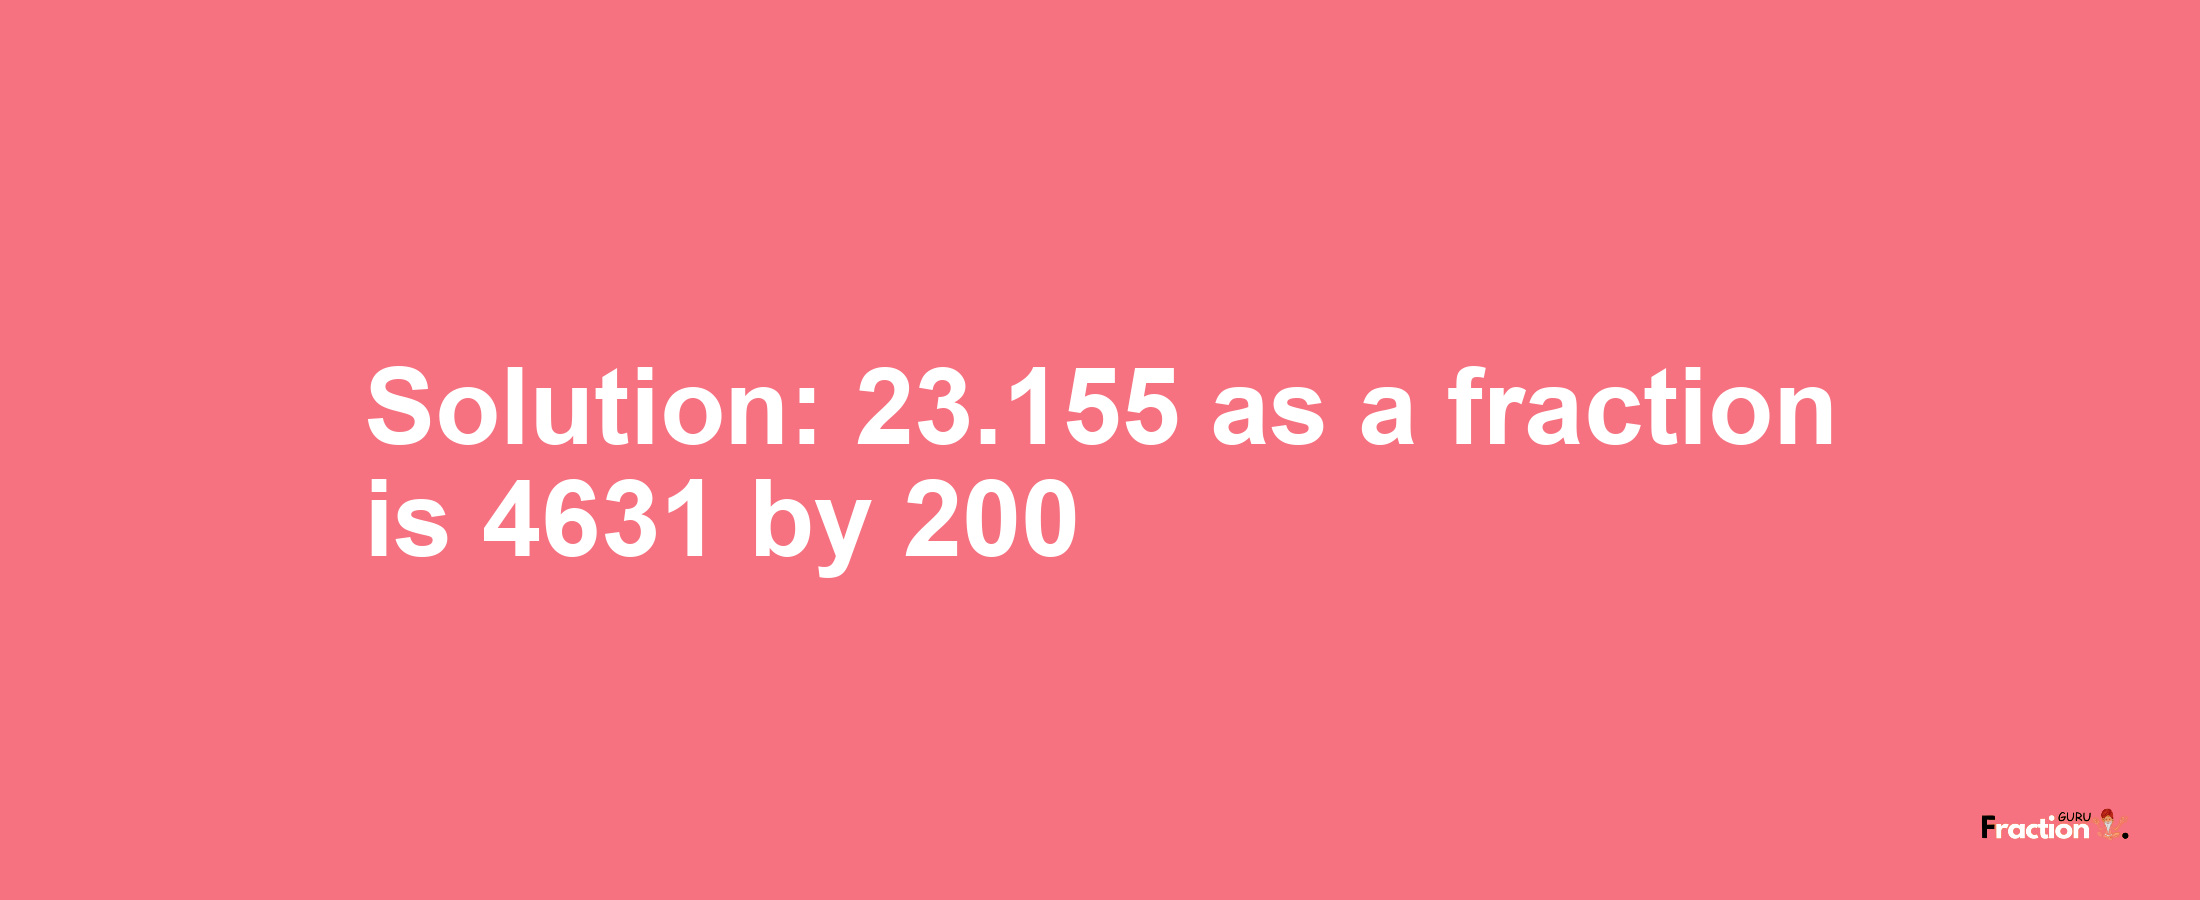 Solution:23.155 as a fraction is 4631/200